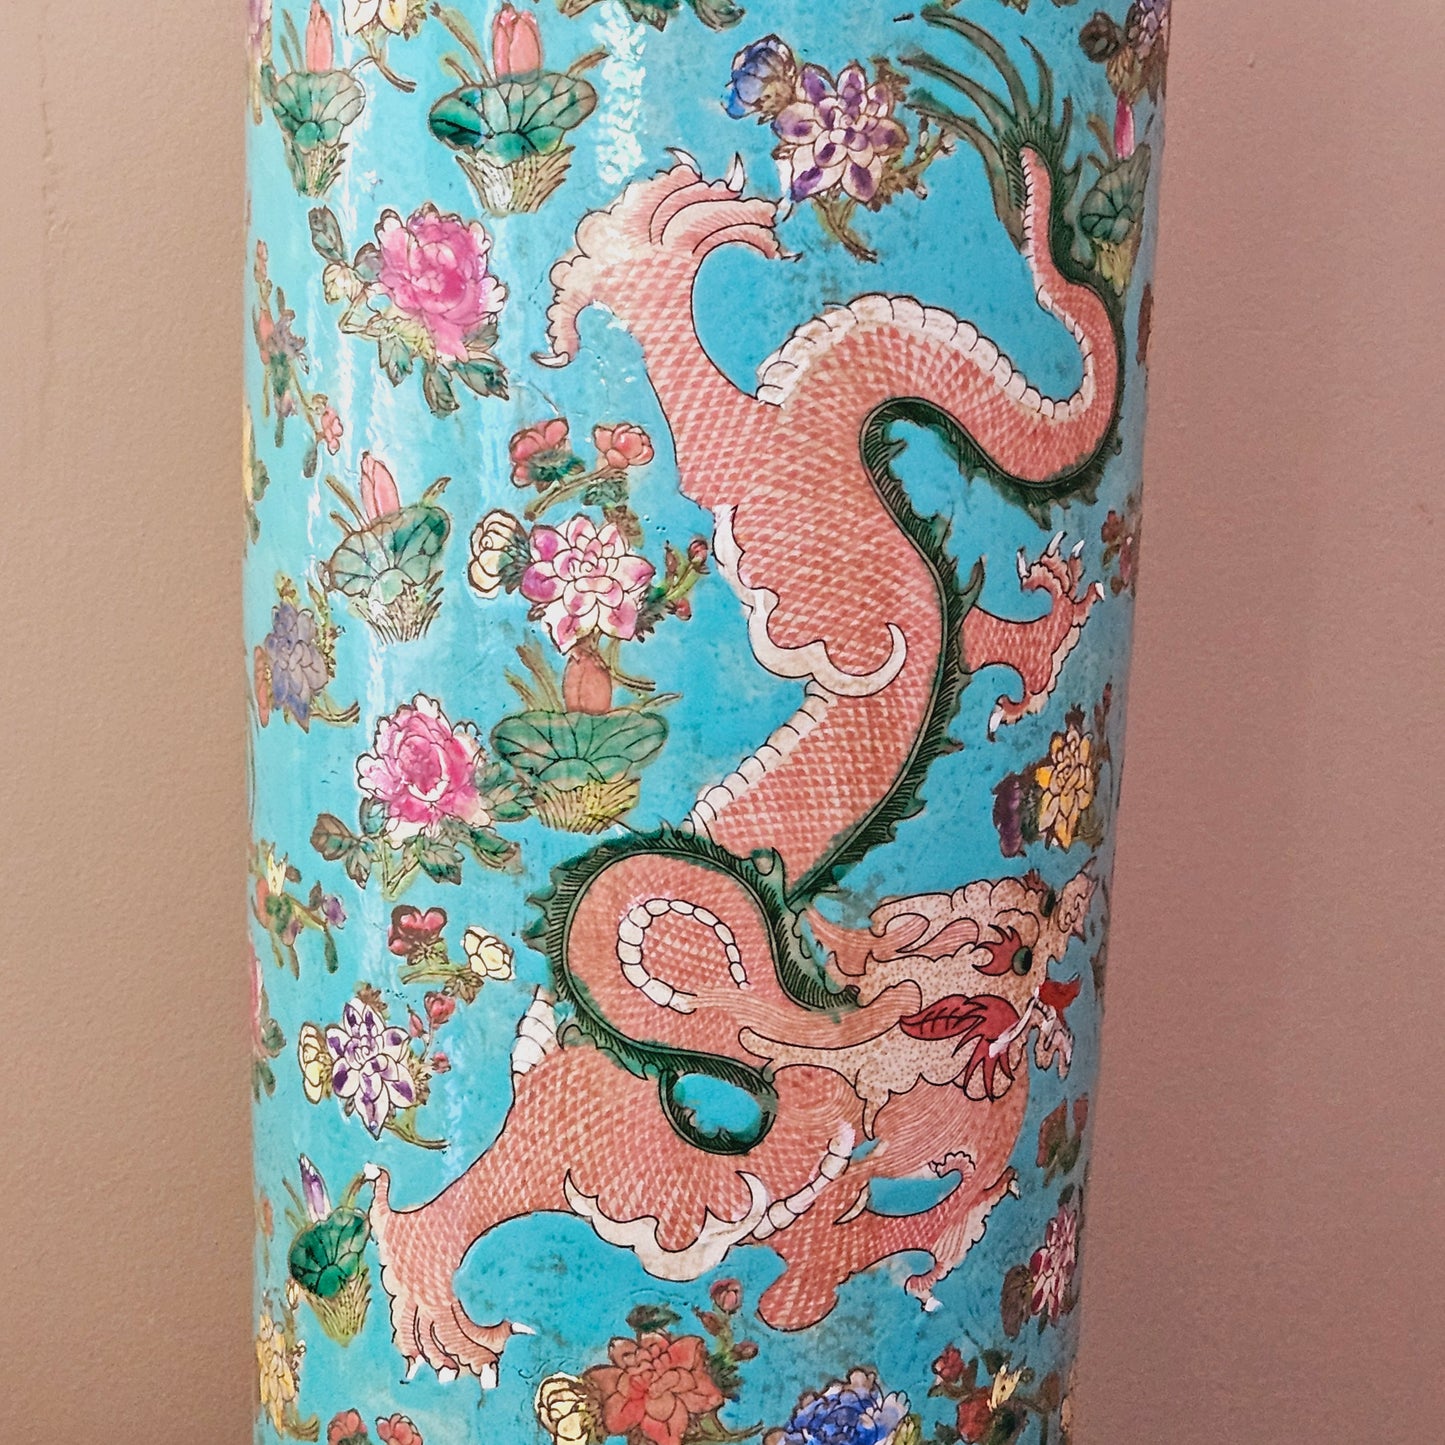 Large Blue Asian Porcelain Umbrella Stand with Dragons ~ 3 Available